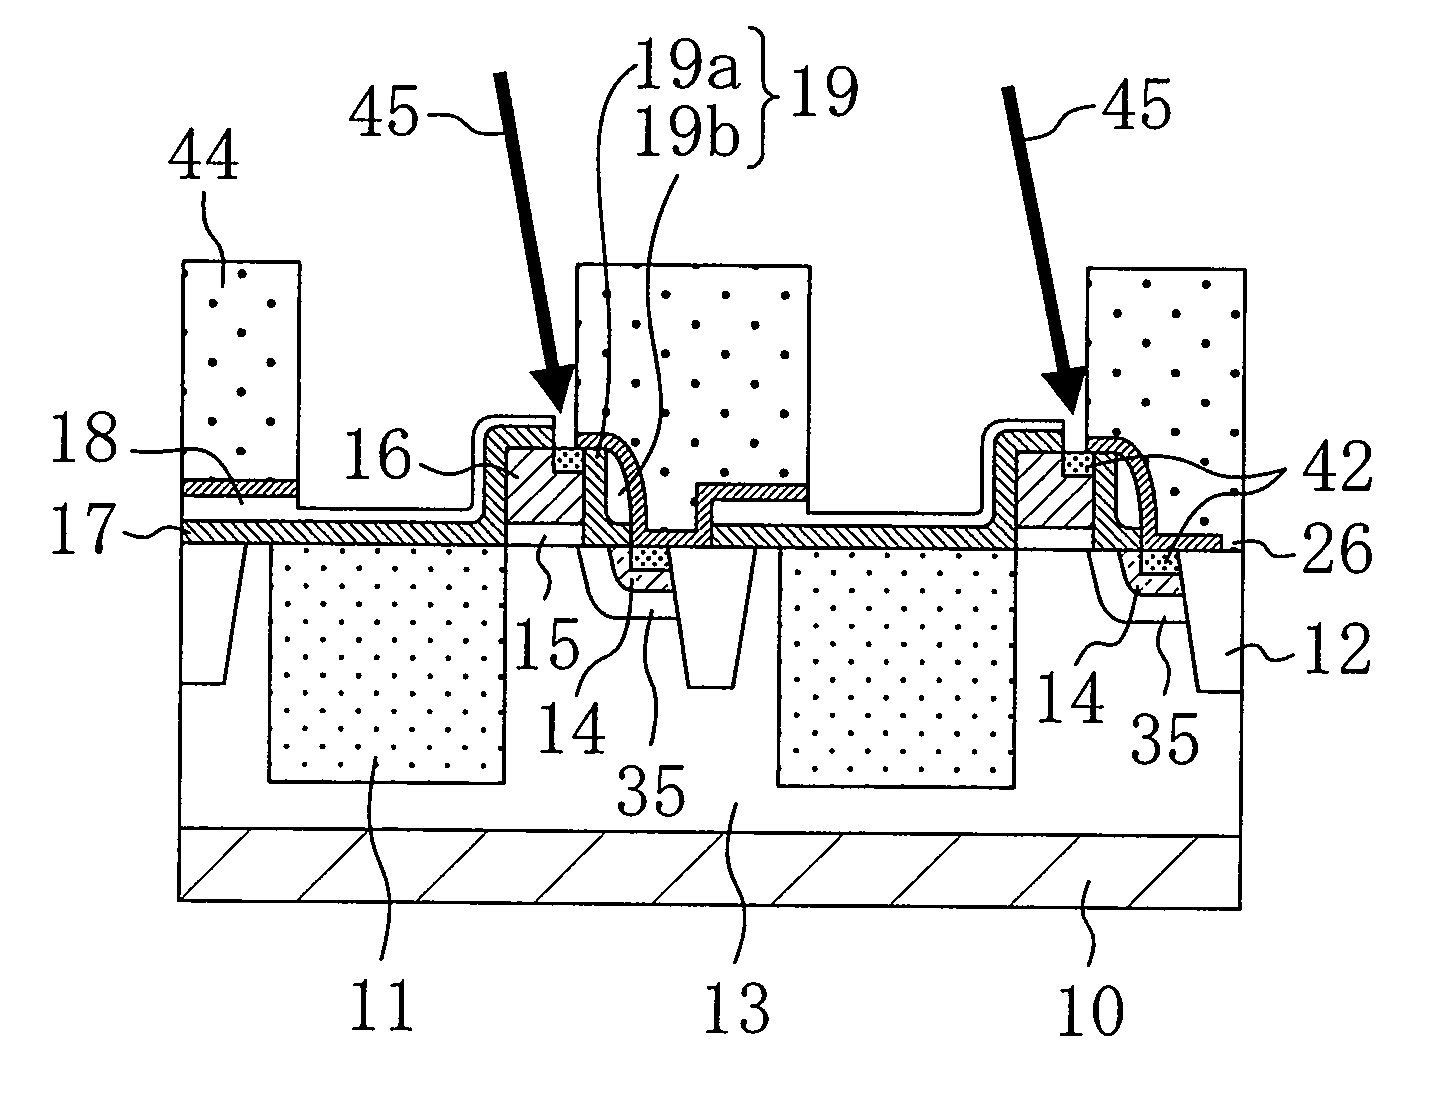 Solid-state imaging element and method for fabricating the same